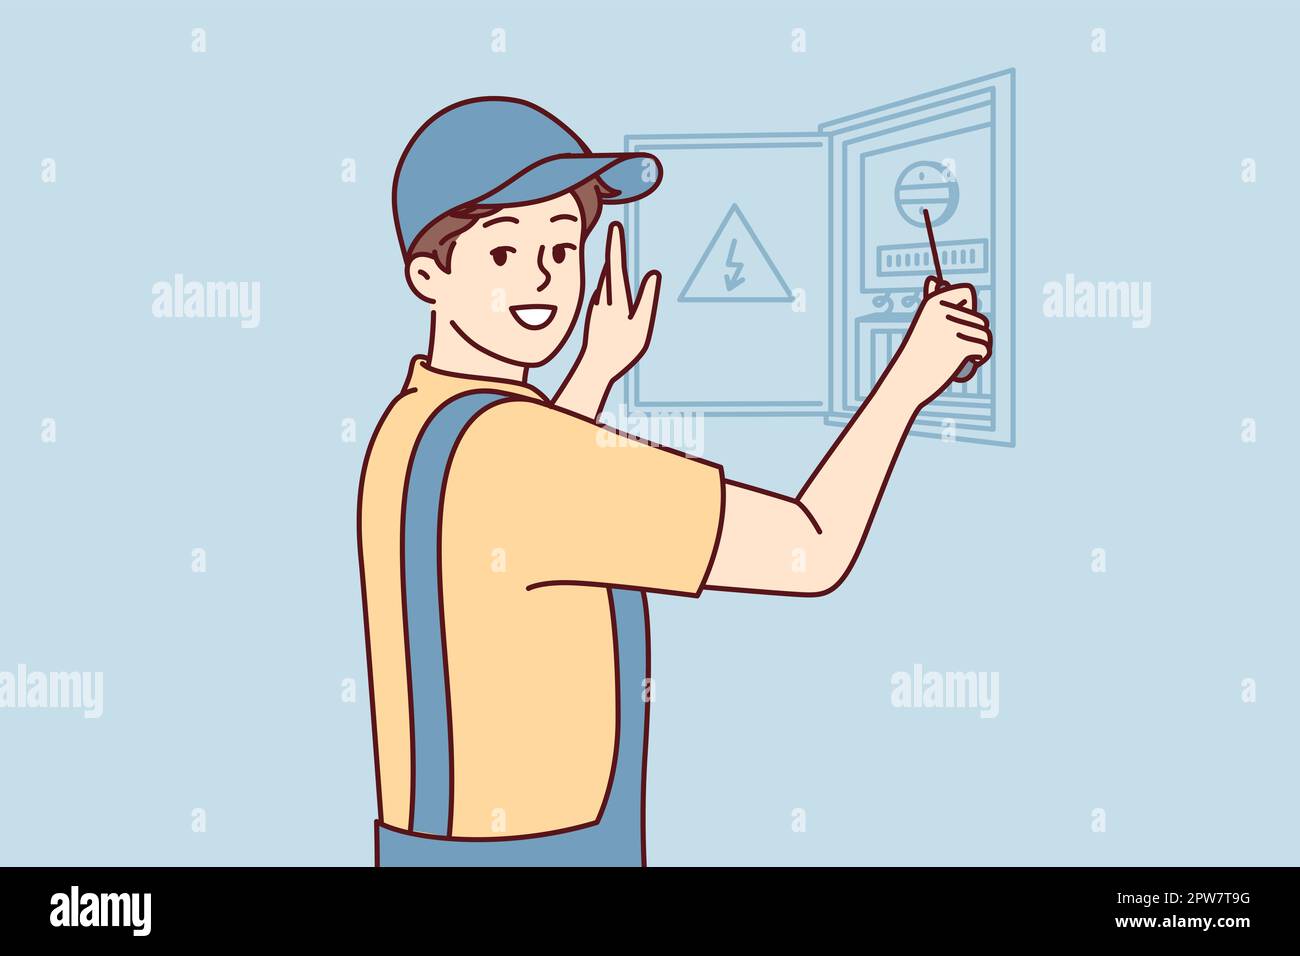 Man electrician is engaged in repair electrical appliances by opening electrical panel. Vector image Stock Vector